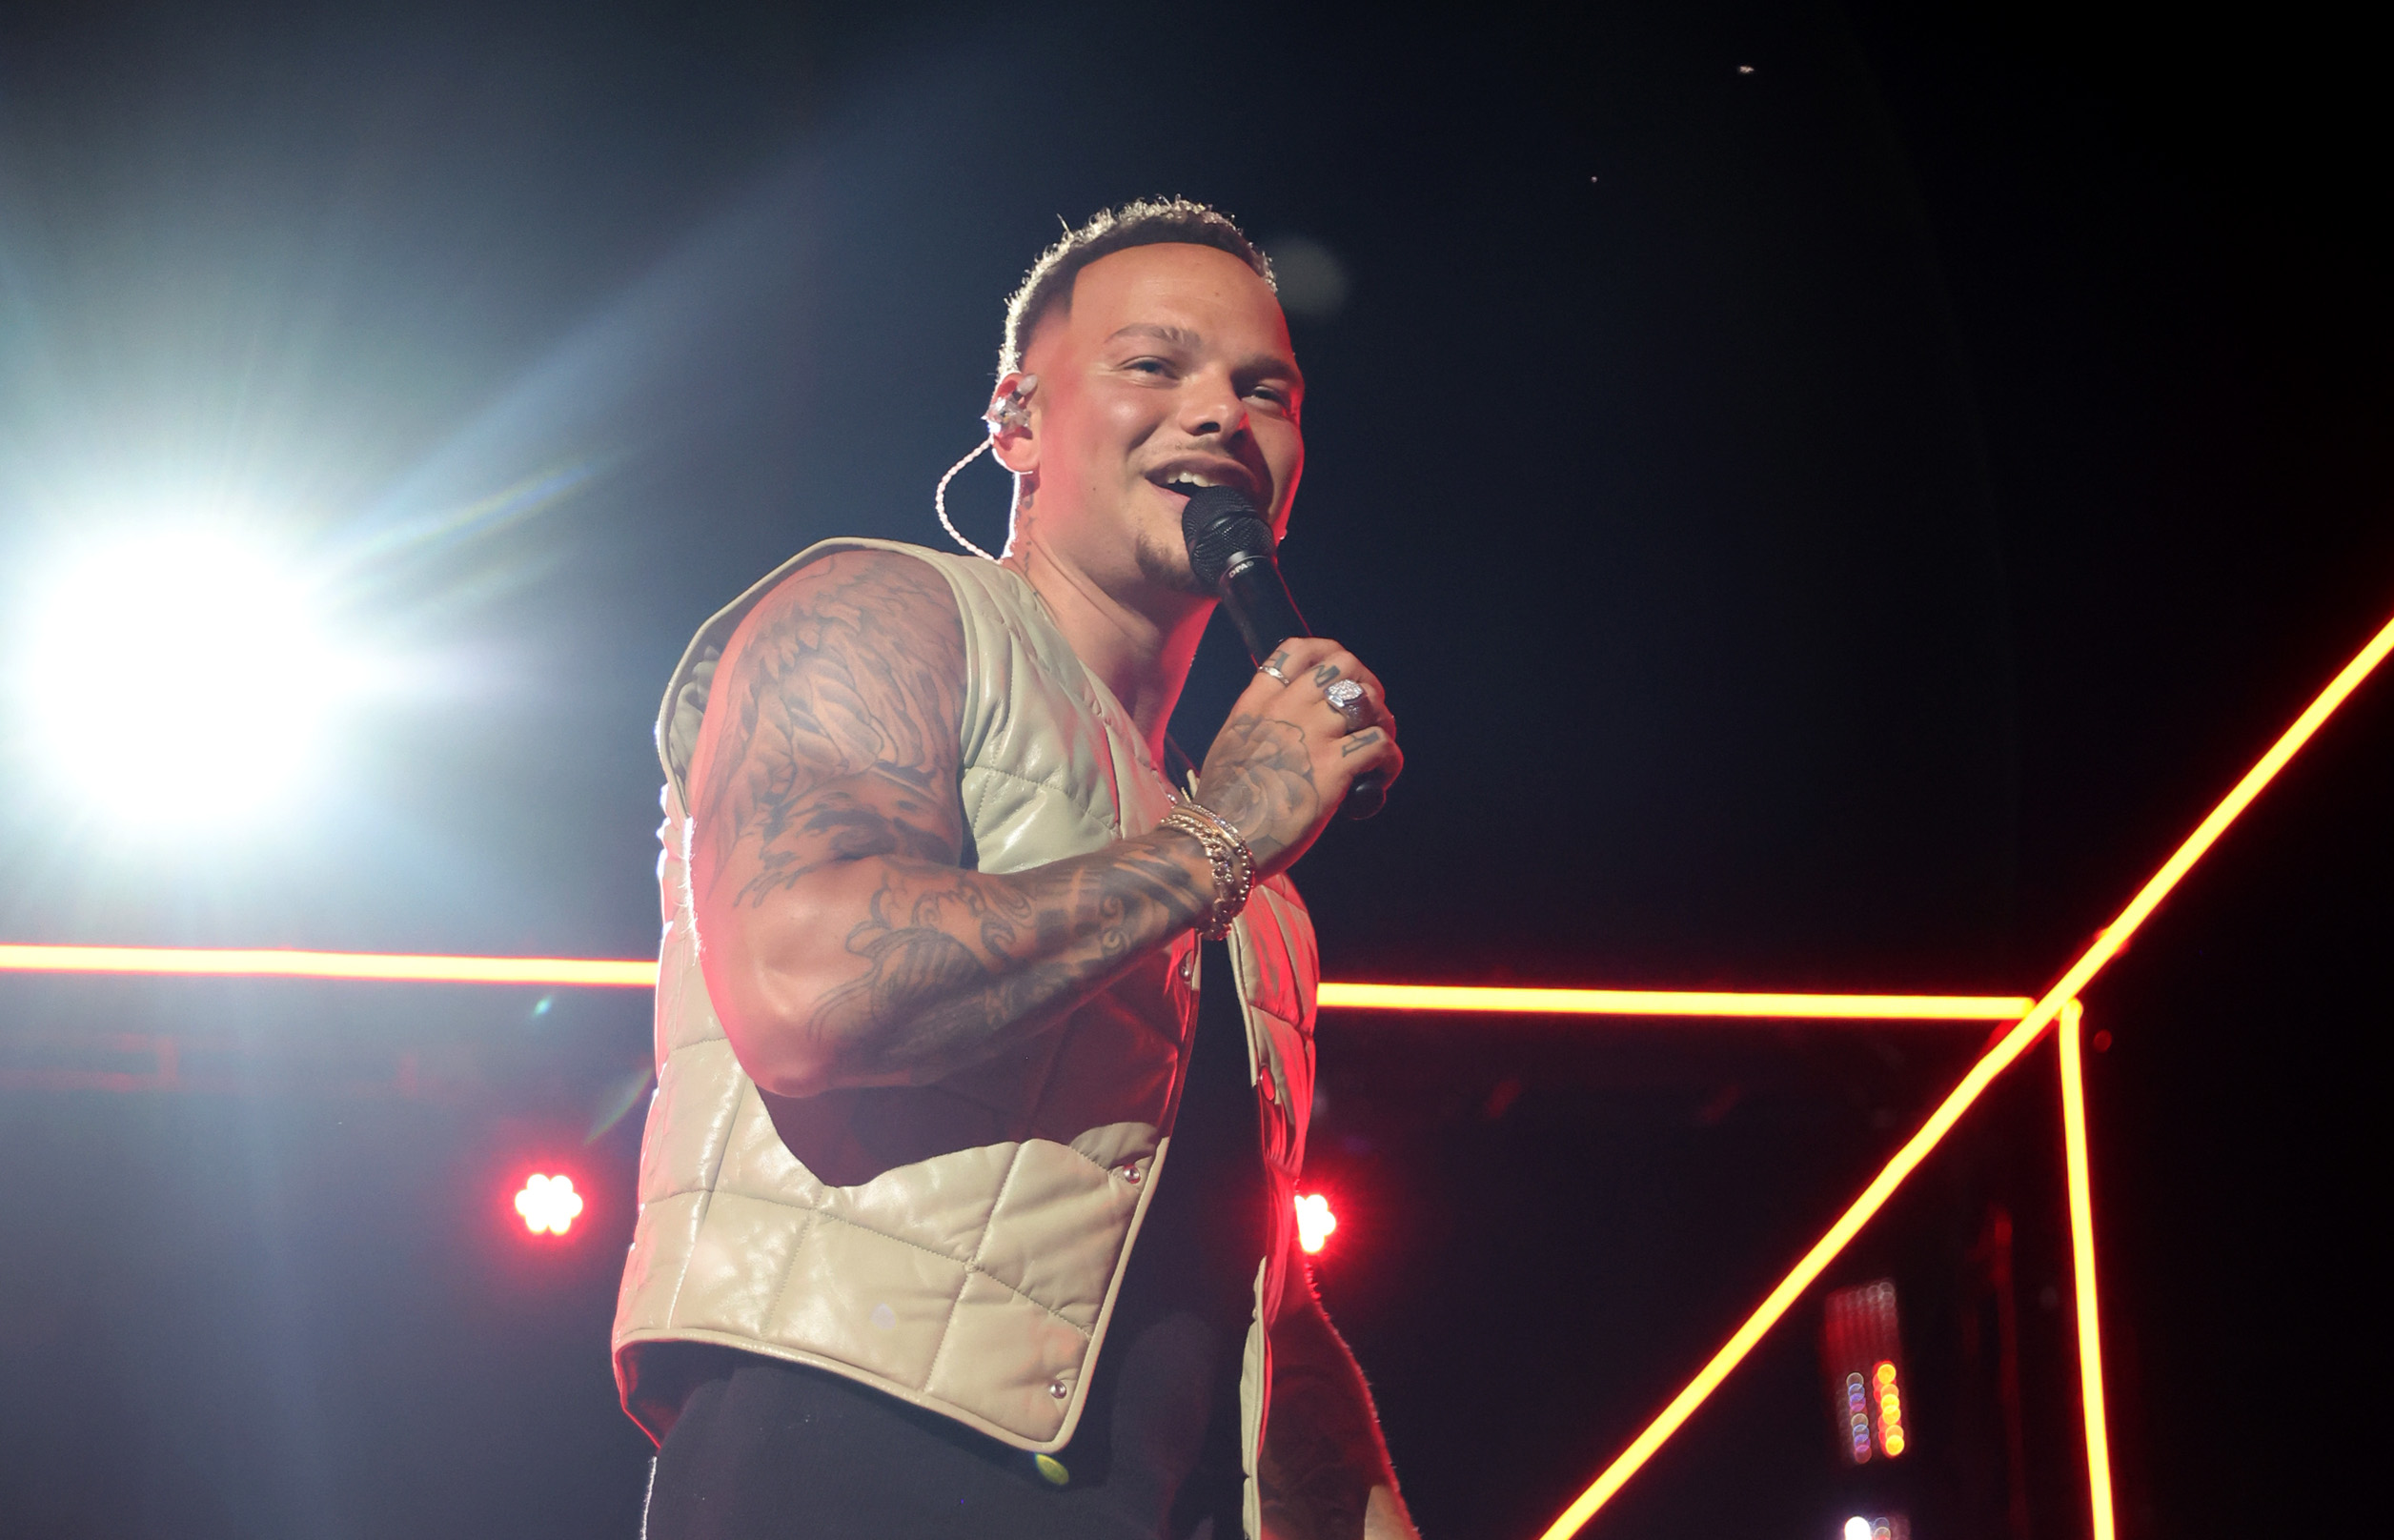 UNSPECIFIED: In this image released on August 28, Kane Brown performs for the 2022 MTV VMAs broadca...